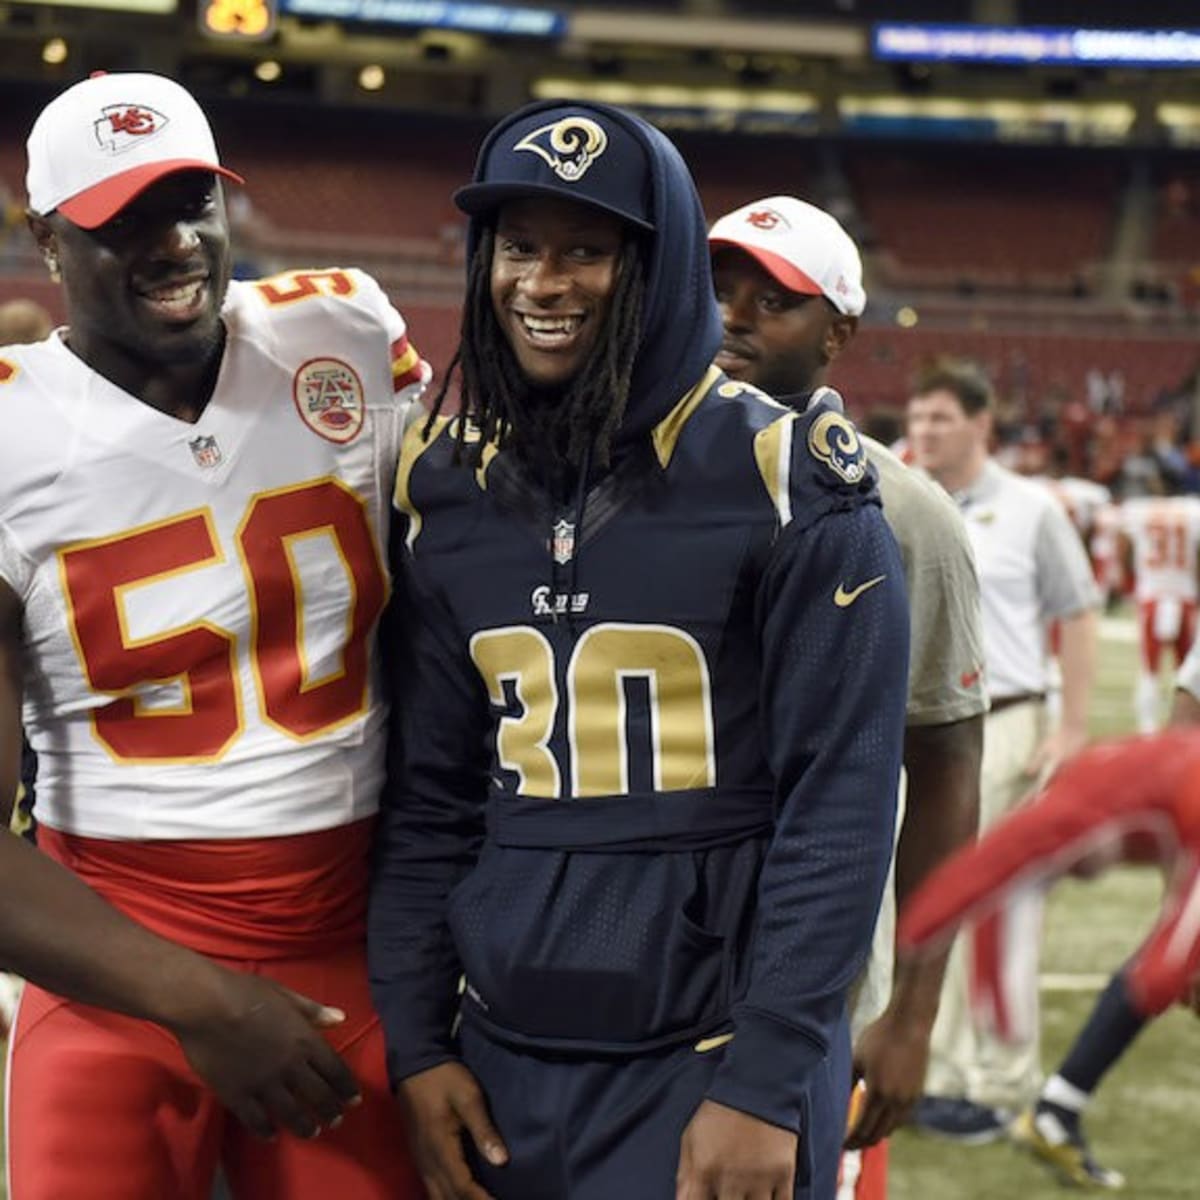 Todd Gurley done playing football, but not officially retiring